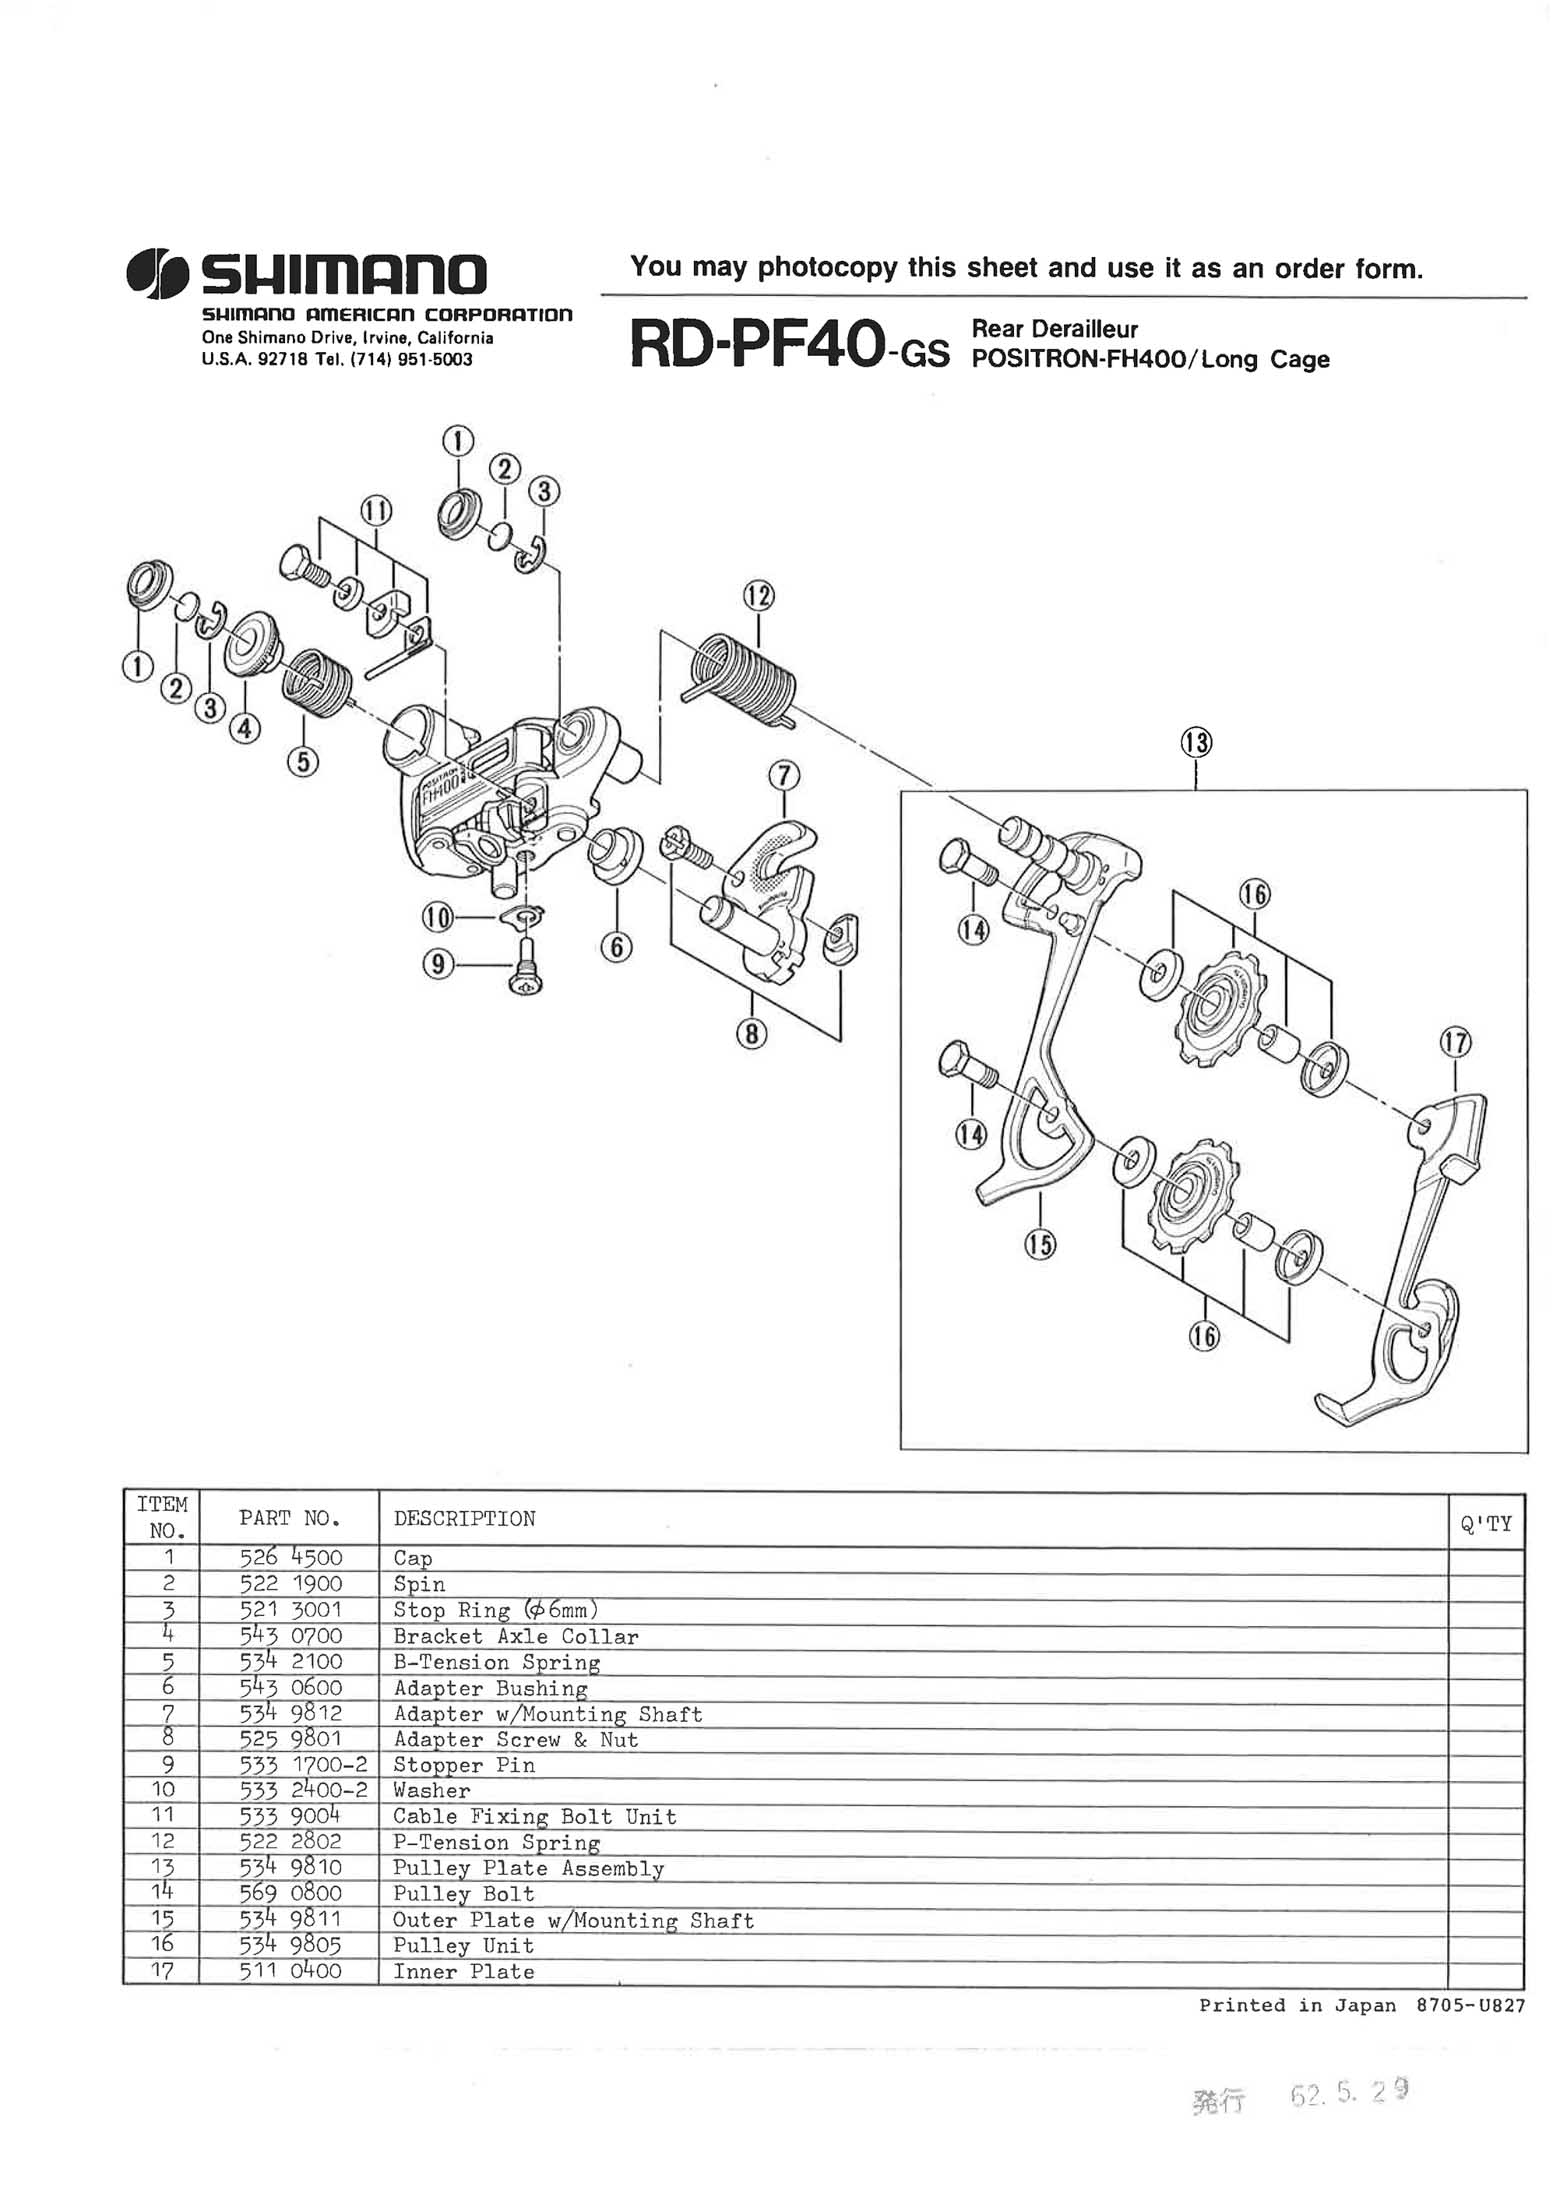 Shimano web site 2020 - exploded views from 1987 Positron FH 400 GS (PF40 GS) 2nd version main image